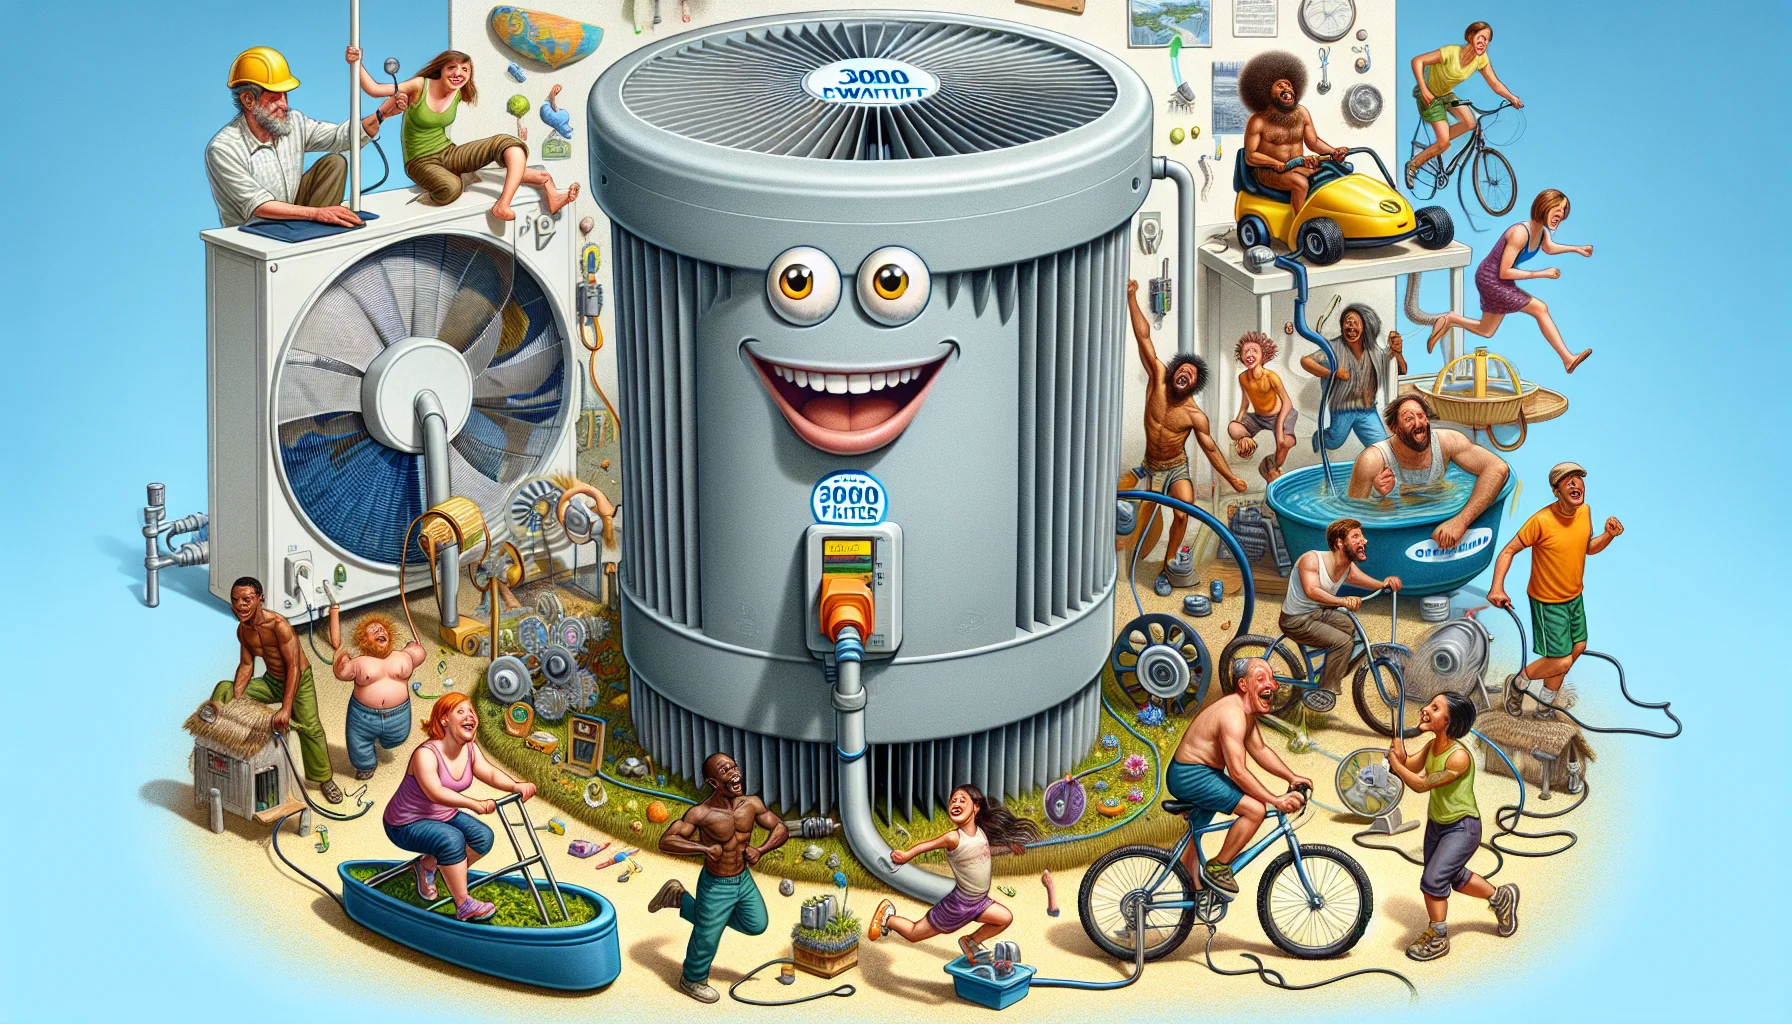 Create a detailed and realistic image that humorously presents a 3000 Watt Filter. The filter is brought to life through anthropomorphism, with expressive cartoon-like eyes and a big, friendly smile, urging people to generate electricity. Surrounding it, a diverse group of people, including a Caucasian woman, a Black man, a Hispanic man, and a South Asian woman, are all enthusiastically using various bio-energy methods like cycling power generators, paddling water wheels, and running in giant hamster wheels - all connected to the energized 3000 Watt Filter. The image is uplifting, tinged with a fun sense of competition and cooperation.